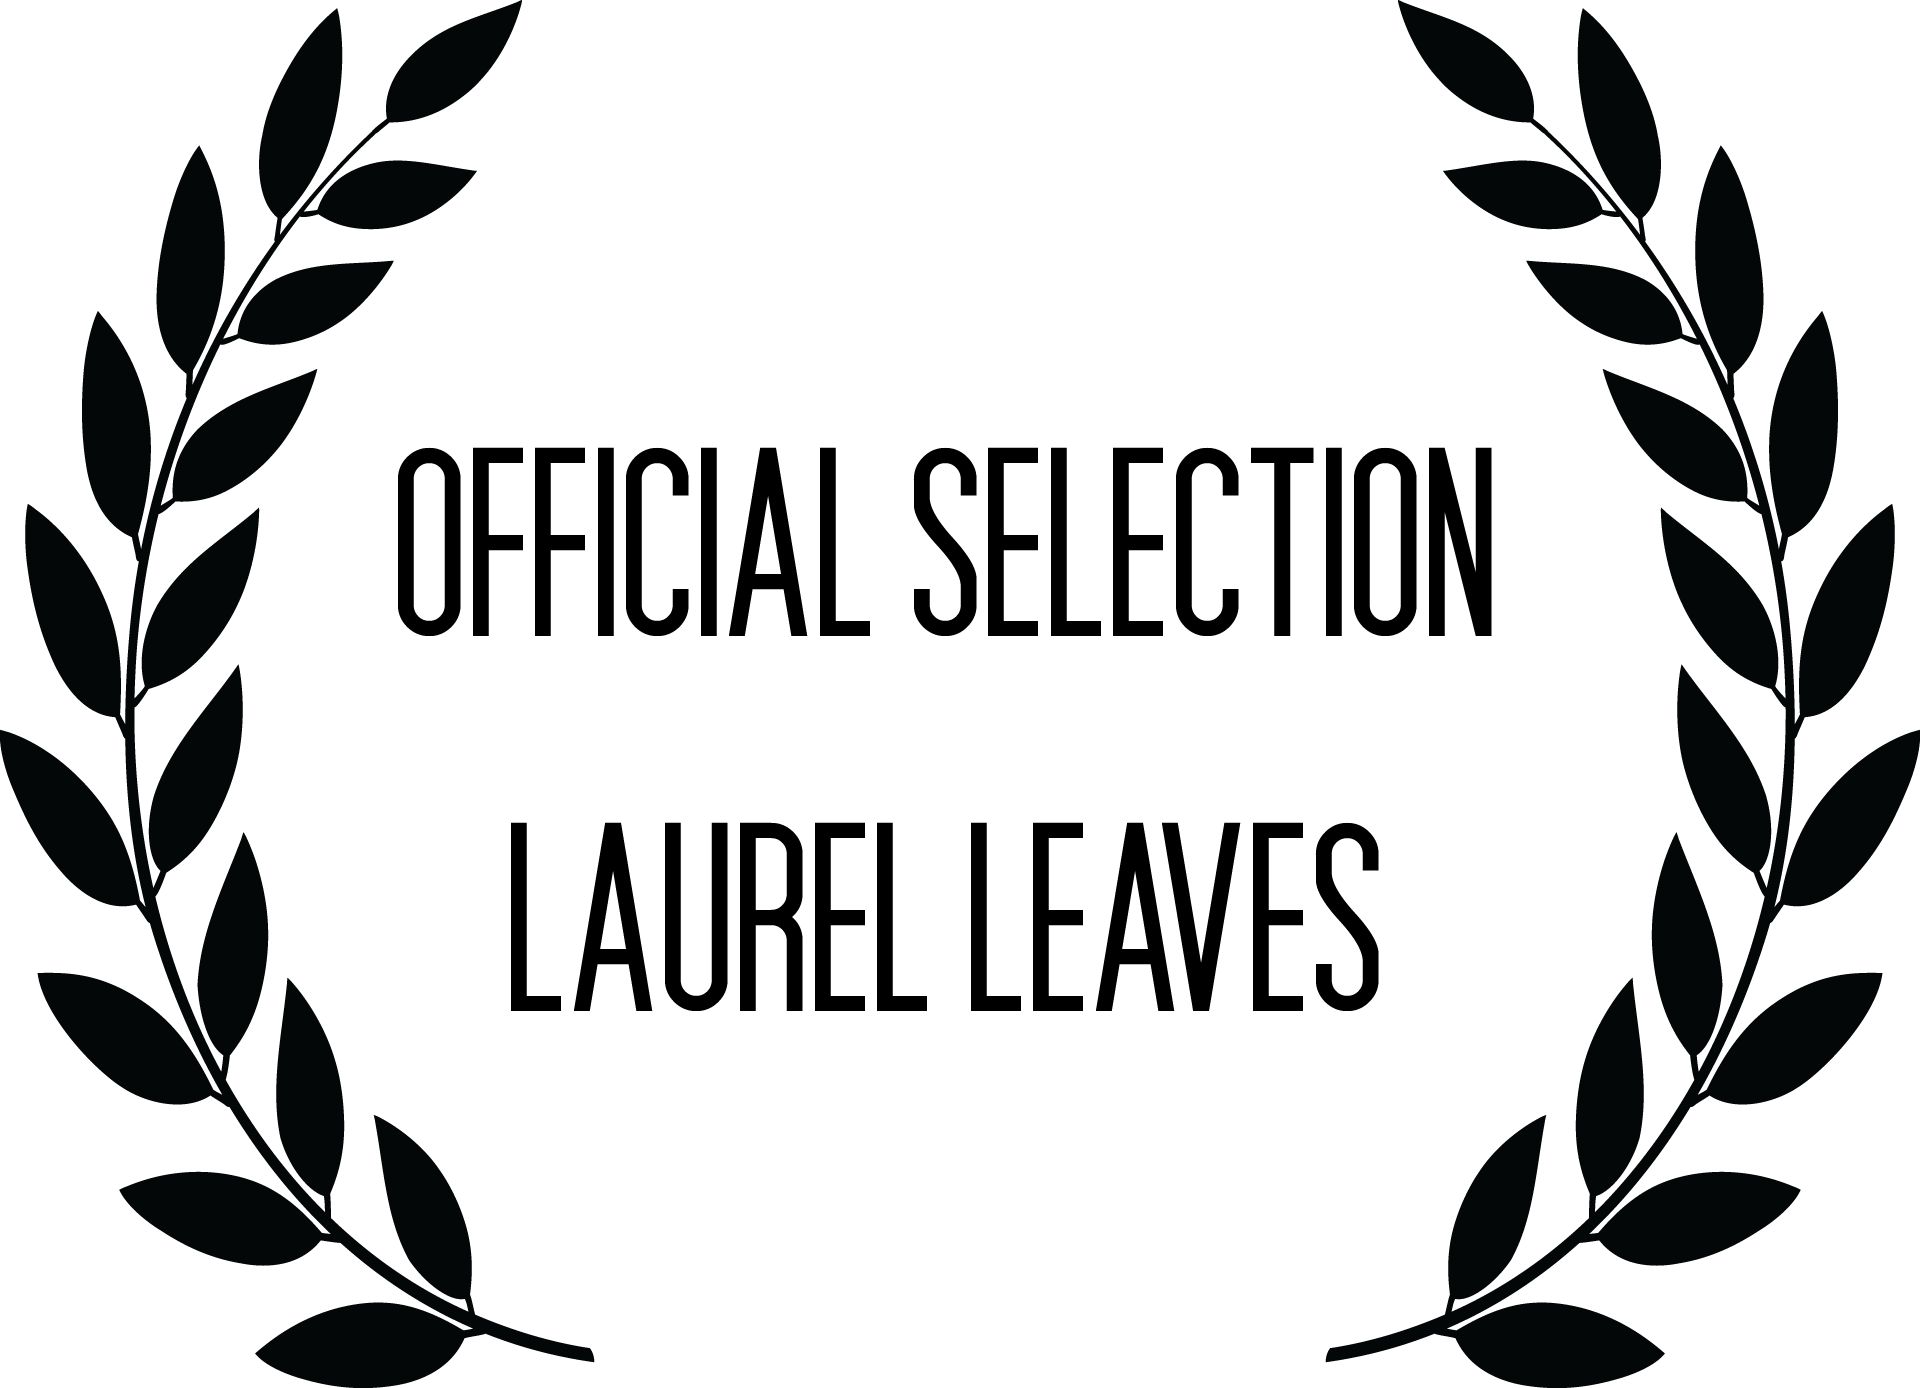 Leaves around Logo - New and Improved Organic Locally-Sourced Hate | Shouts from the ...